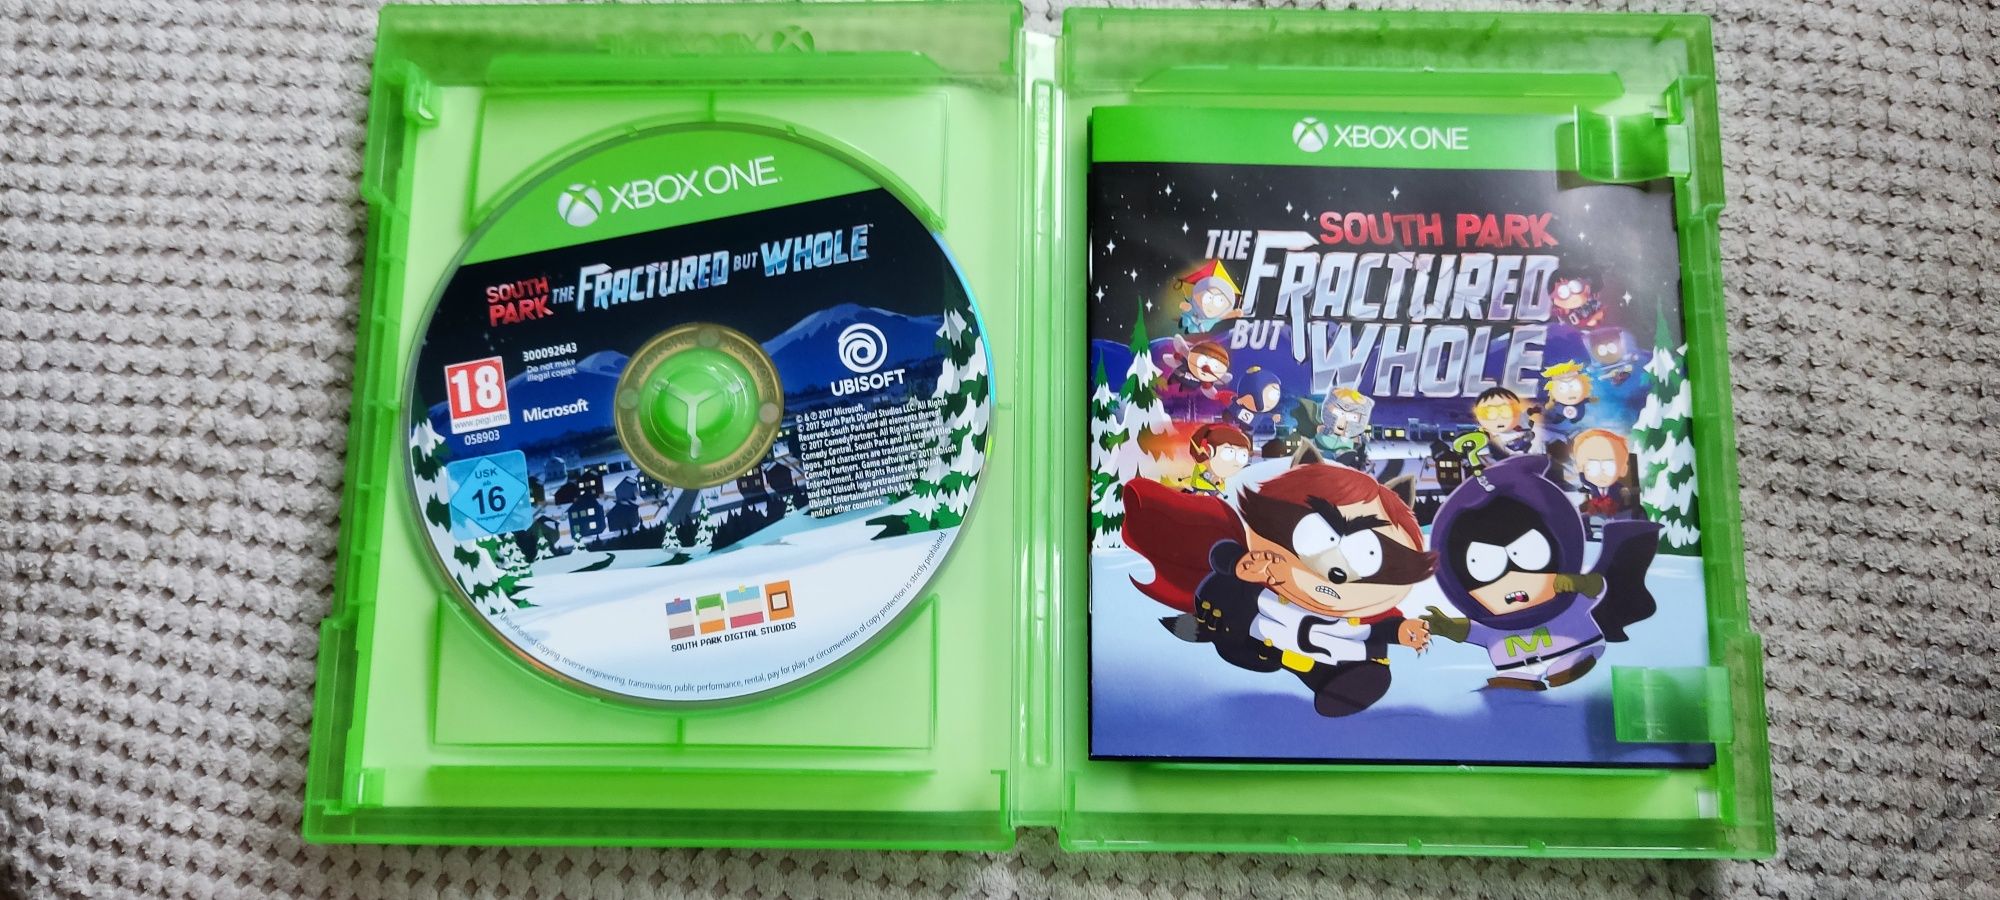 South park the fractured but whole pl Xbox one jak nowa